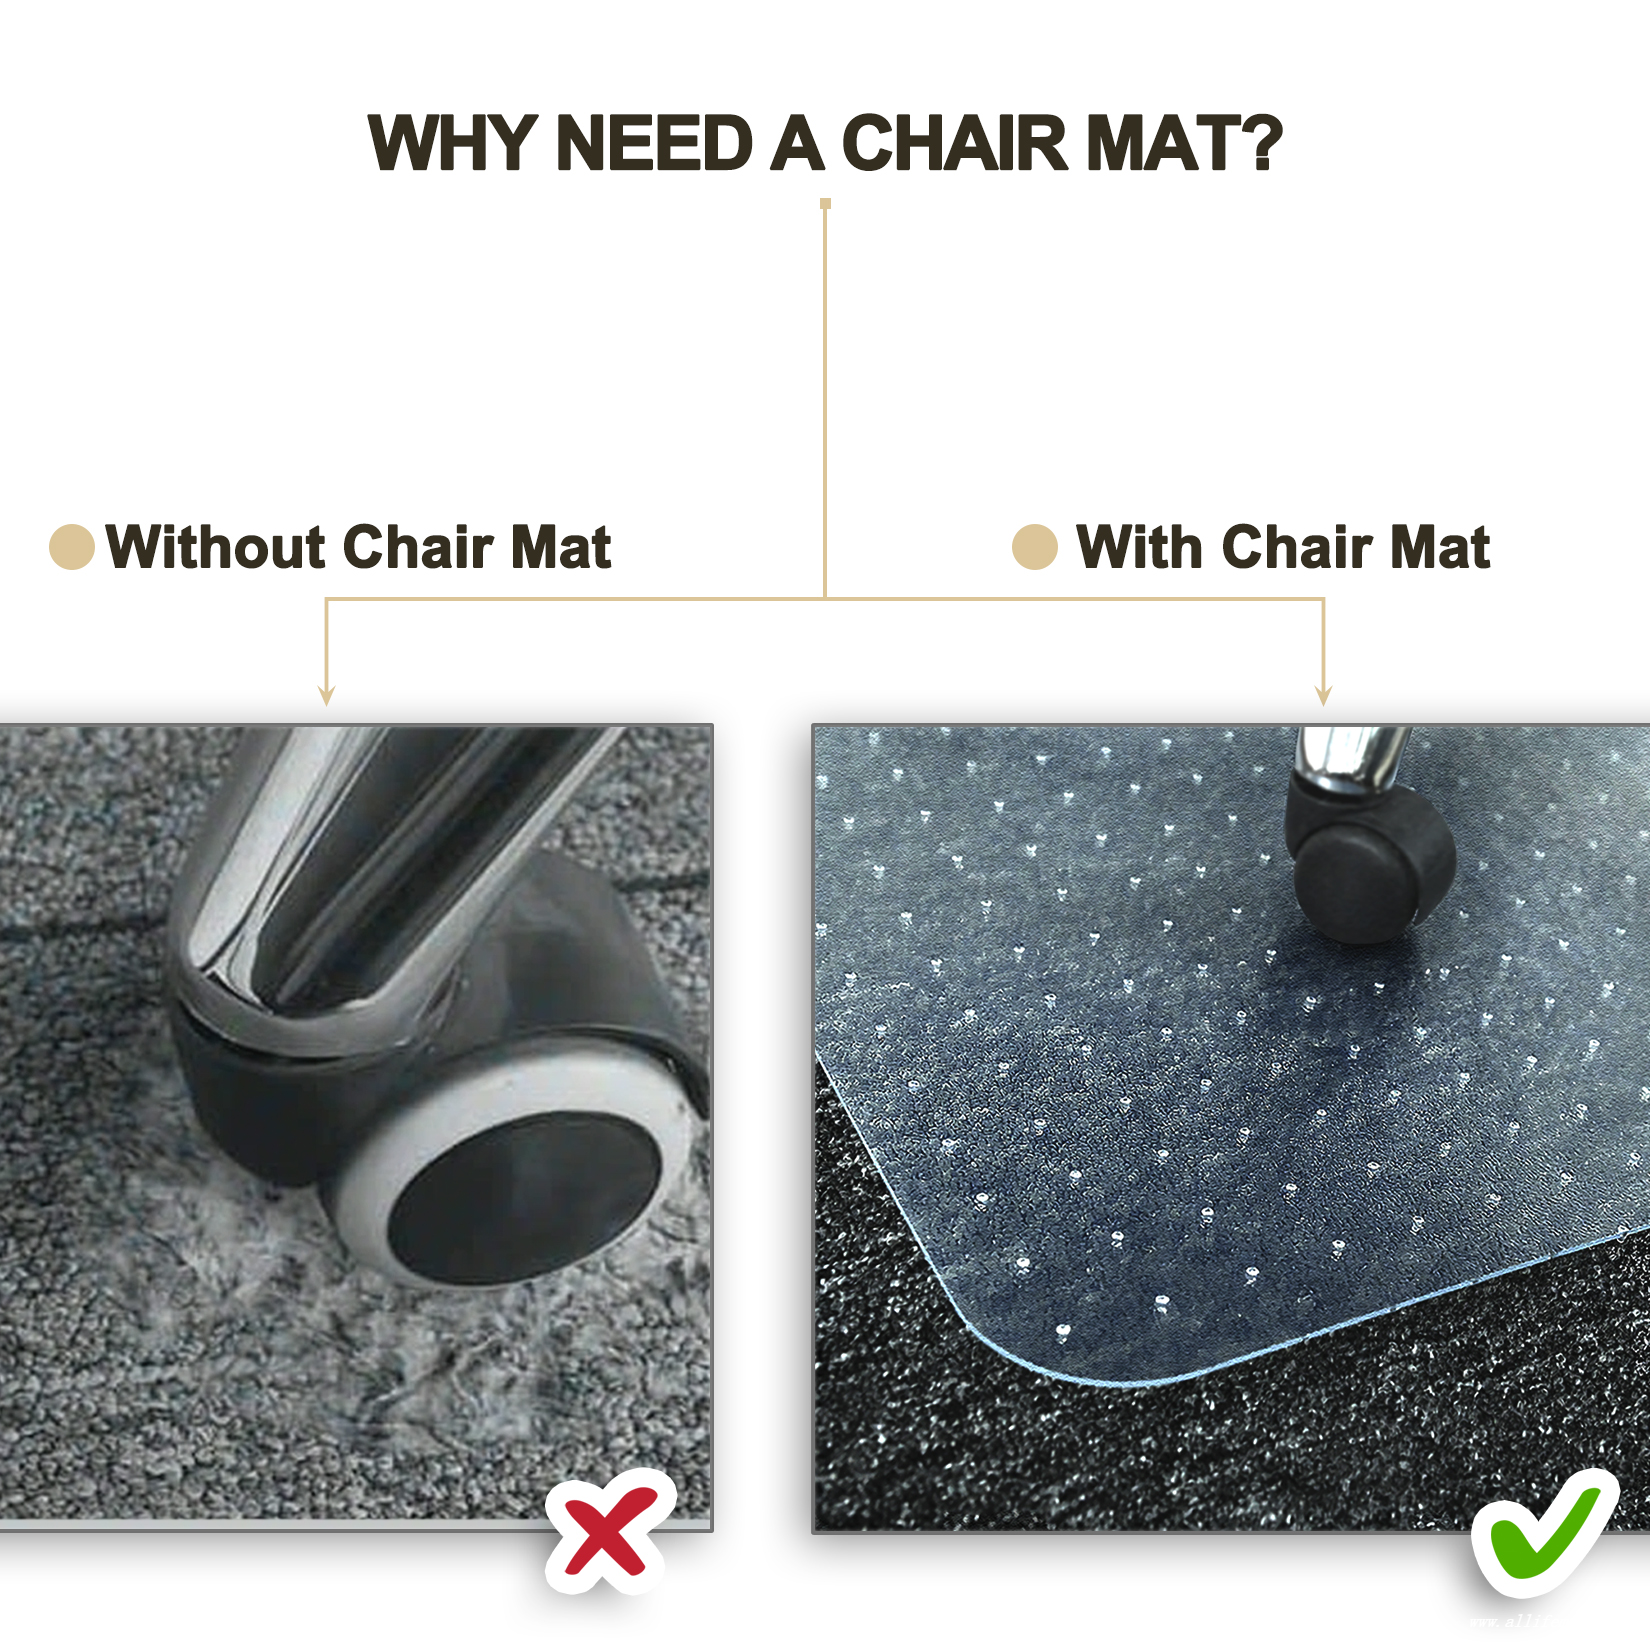 why need a chair mat